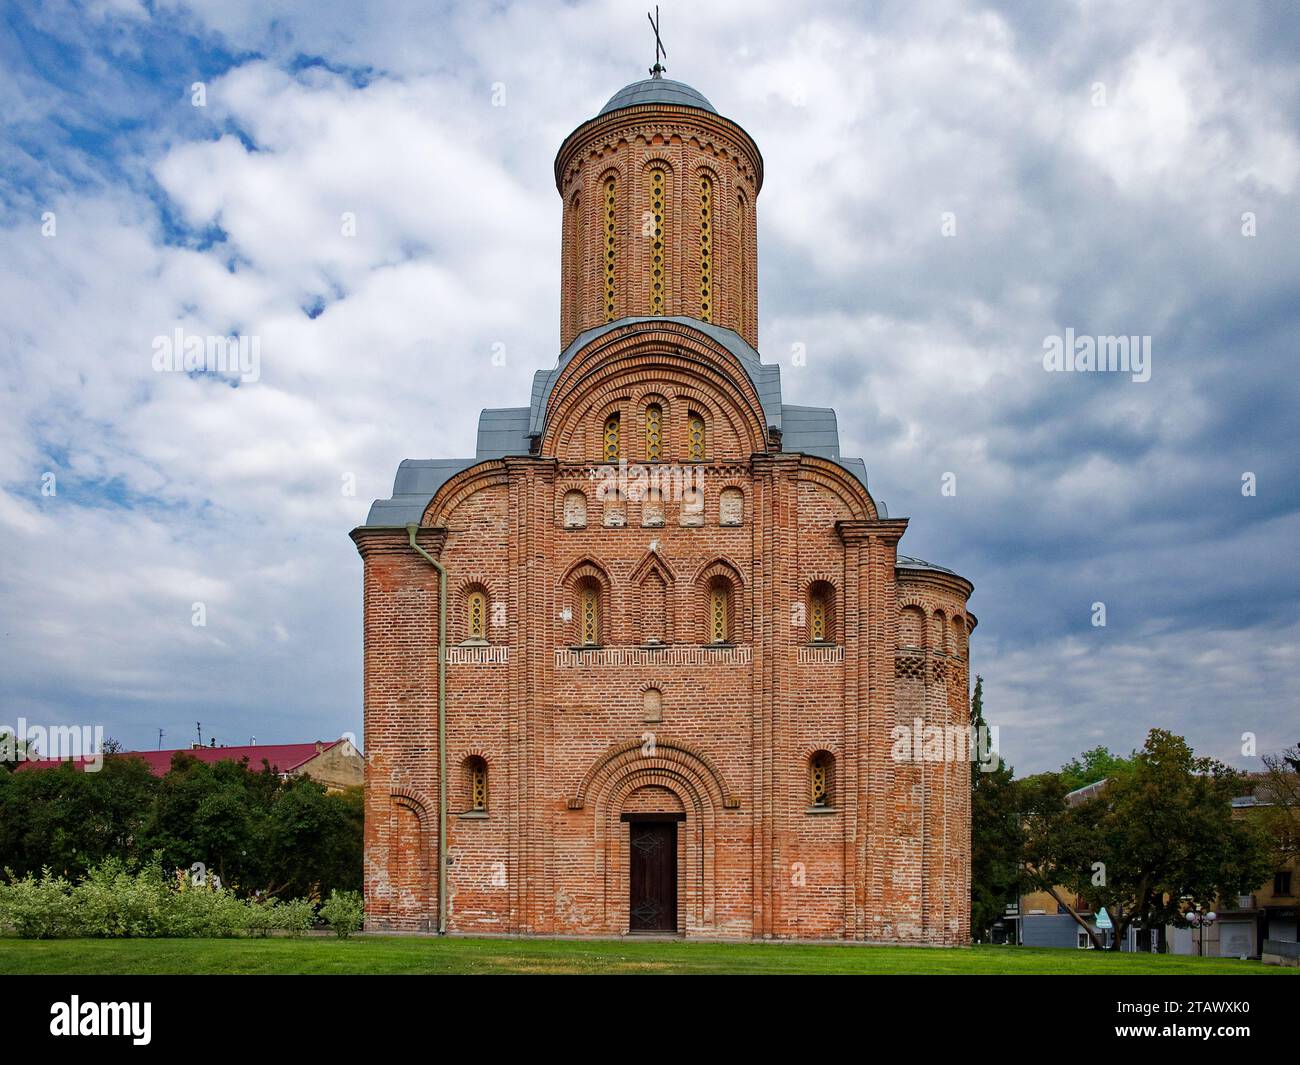 The Pyatnitskaya Church in Chernigov, Ukraine, a red brick building with a tall tower, set against a backdrop of green trees and a clear sky. Friday C Stock Photo